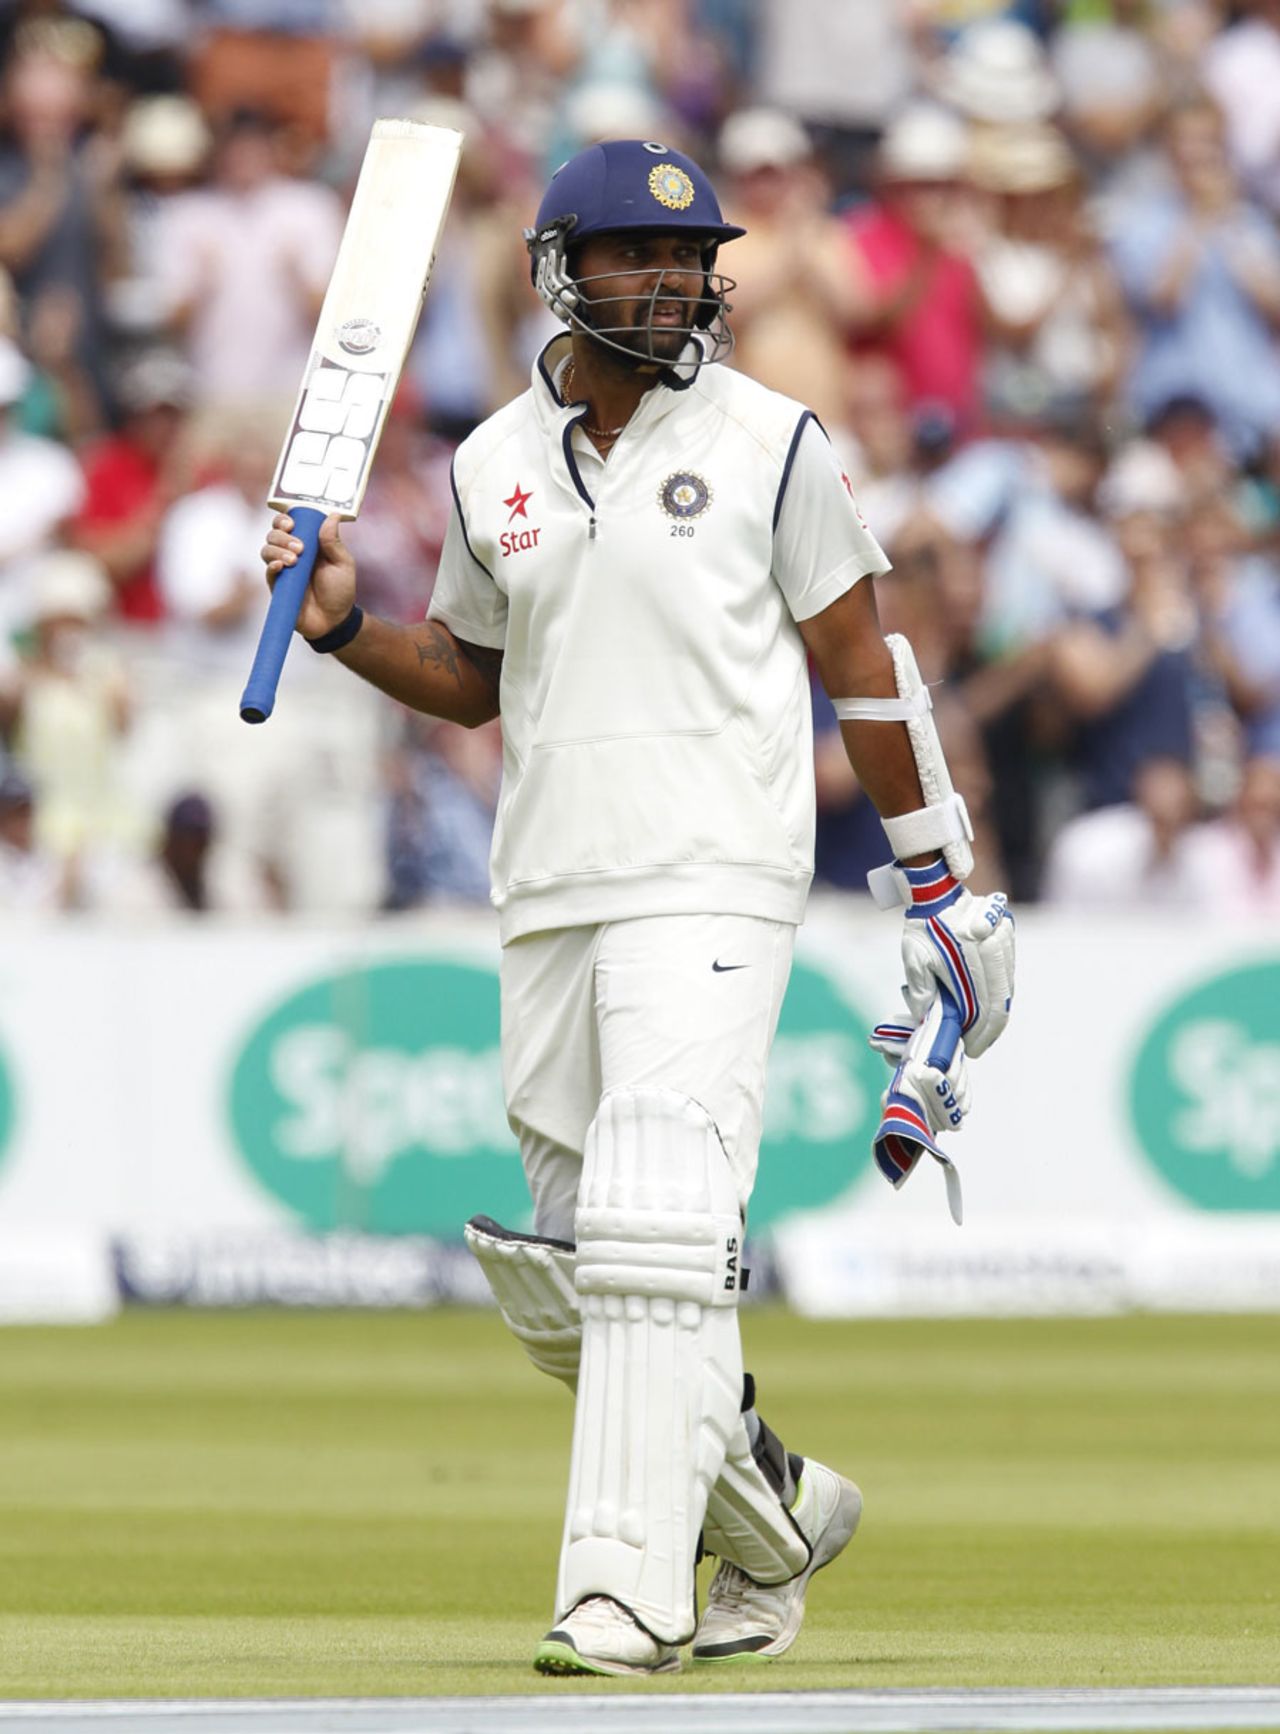 M Vijay heads off after being dismissed for 95, England v India, 2nd Investec Test, Lord's, 4th day, July 20, 2014